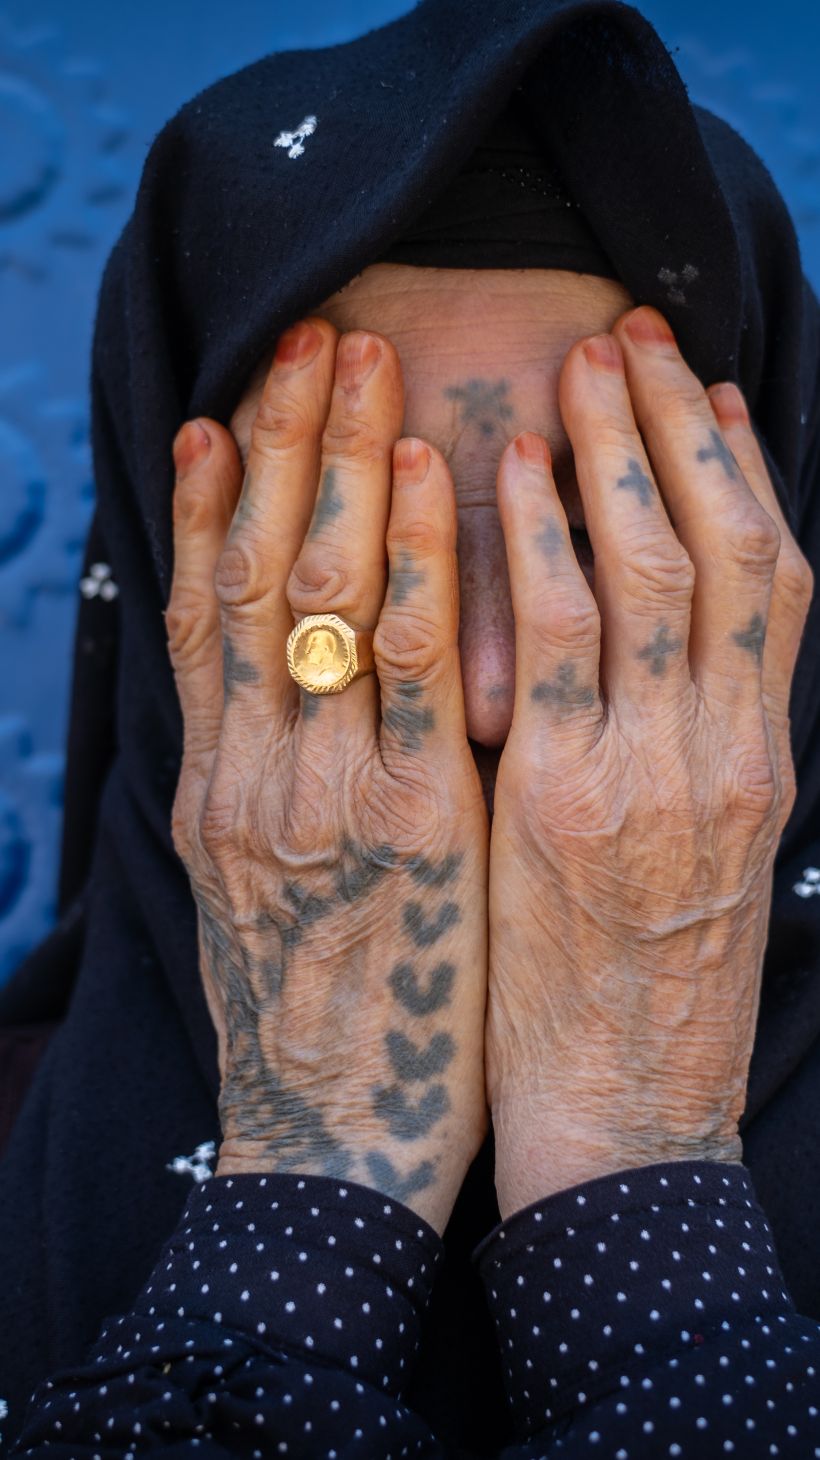 A photo of Fatma Arik, who is in her 70s, with a ladder motif etched across her hands.